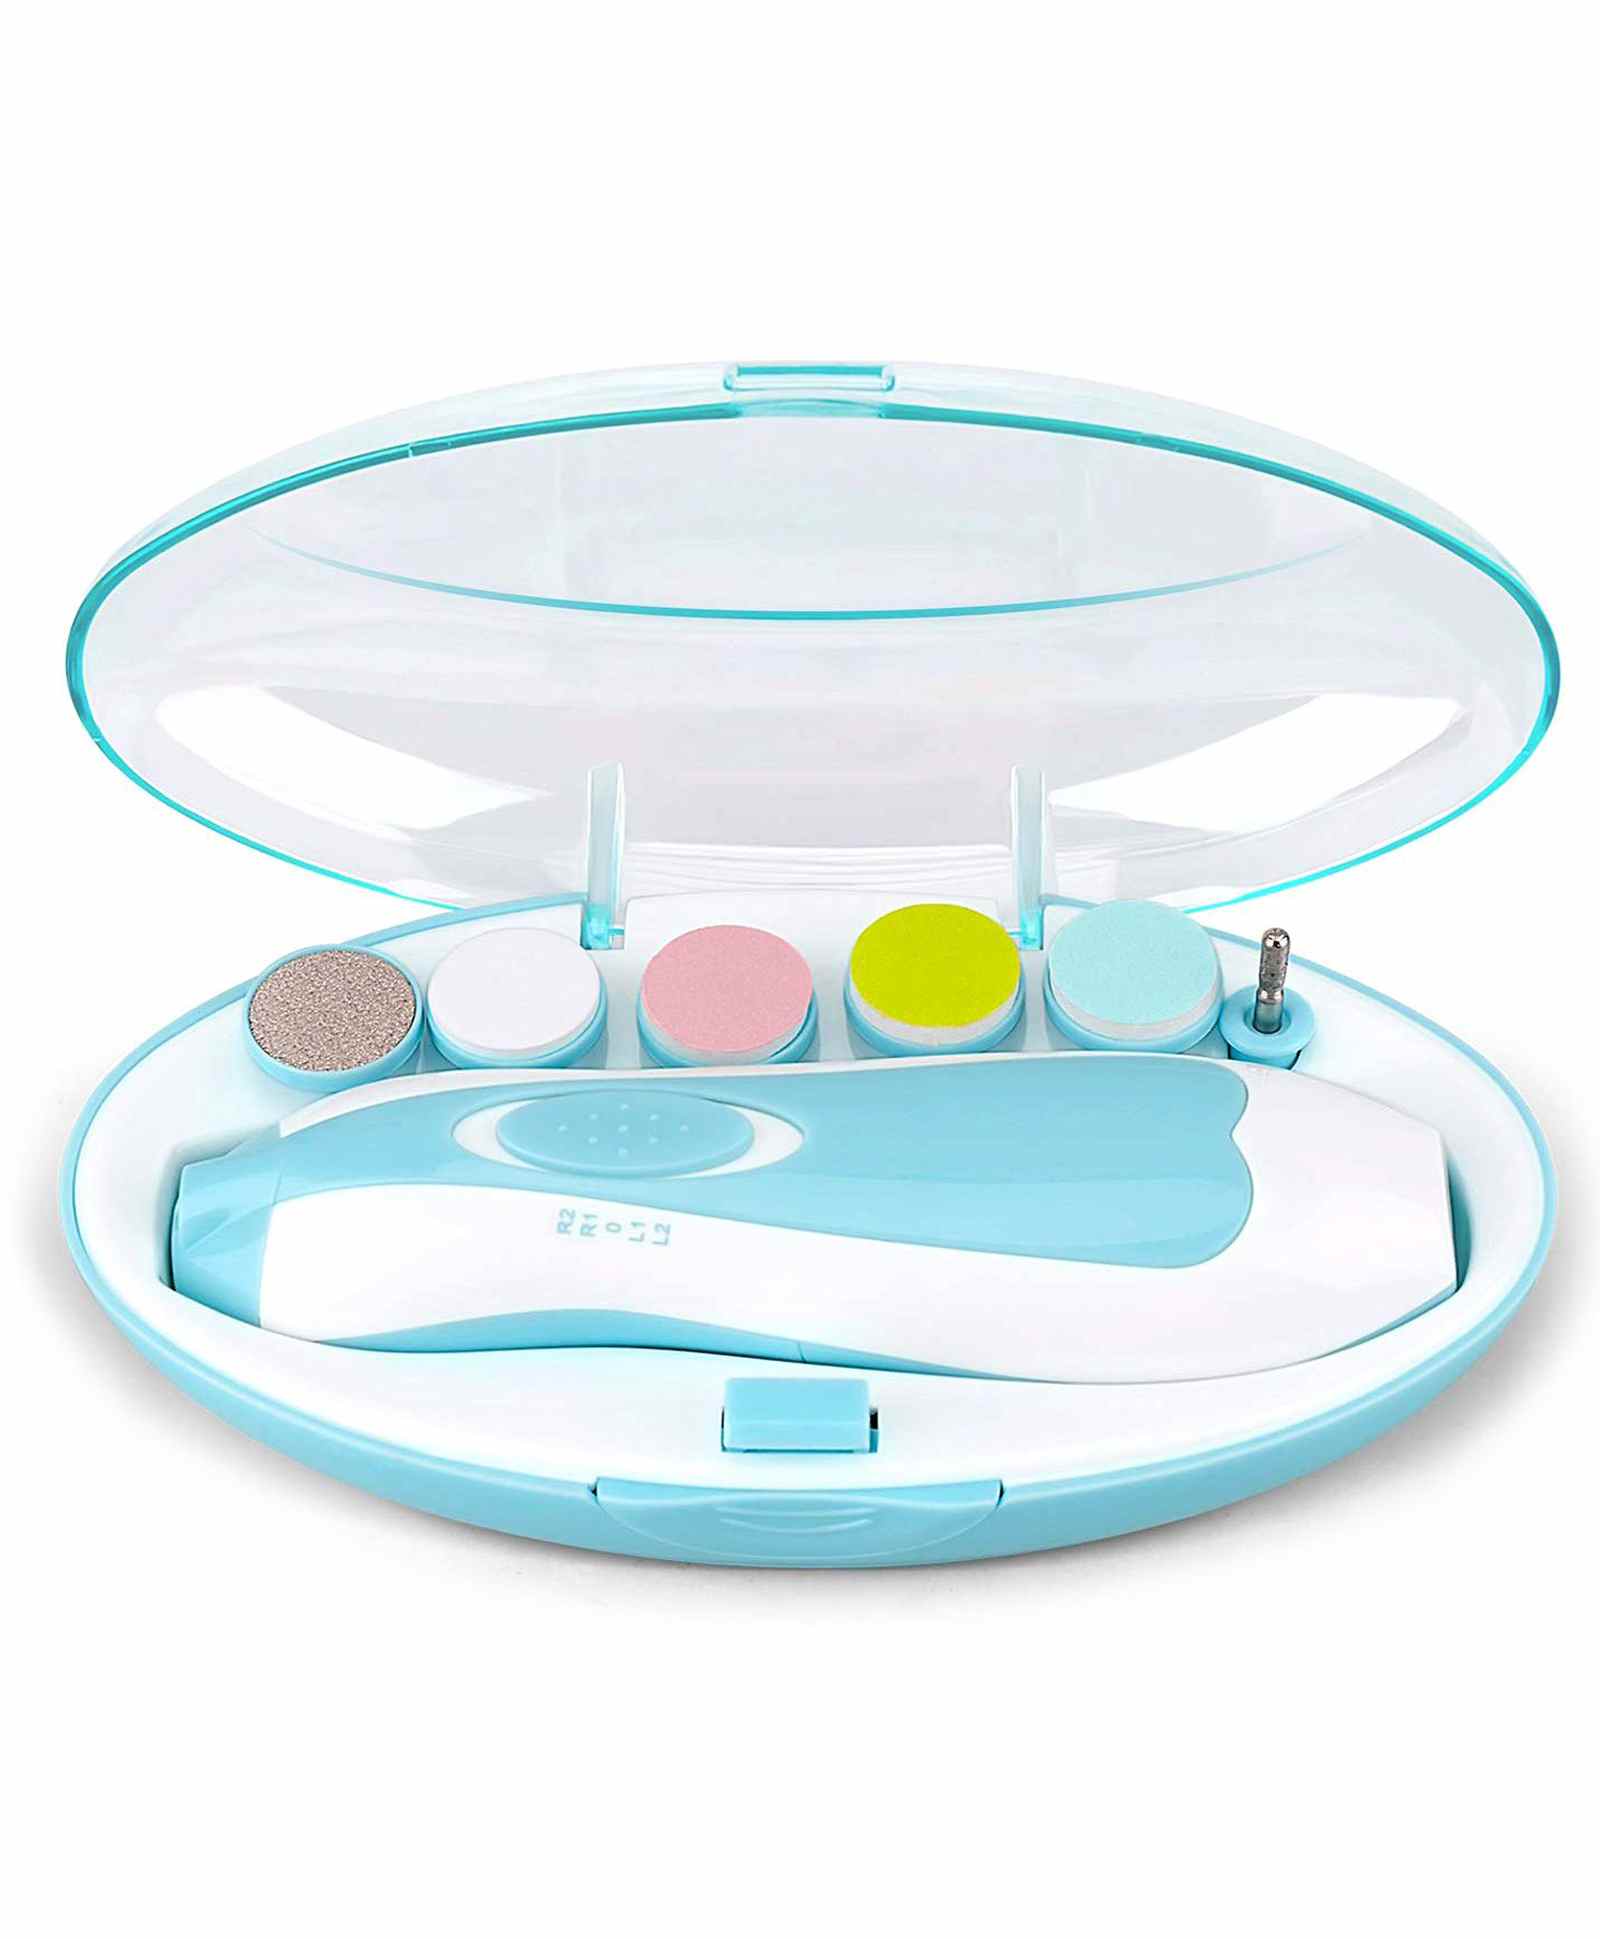 Baby Healthcare and Grooming Kit, 26 in 1 Baby Electric Nail Trimmer Set  Newborn | eBay